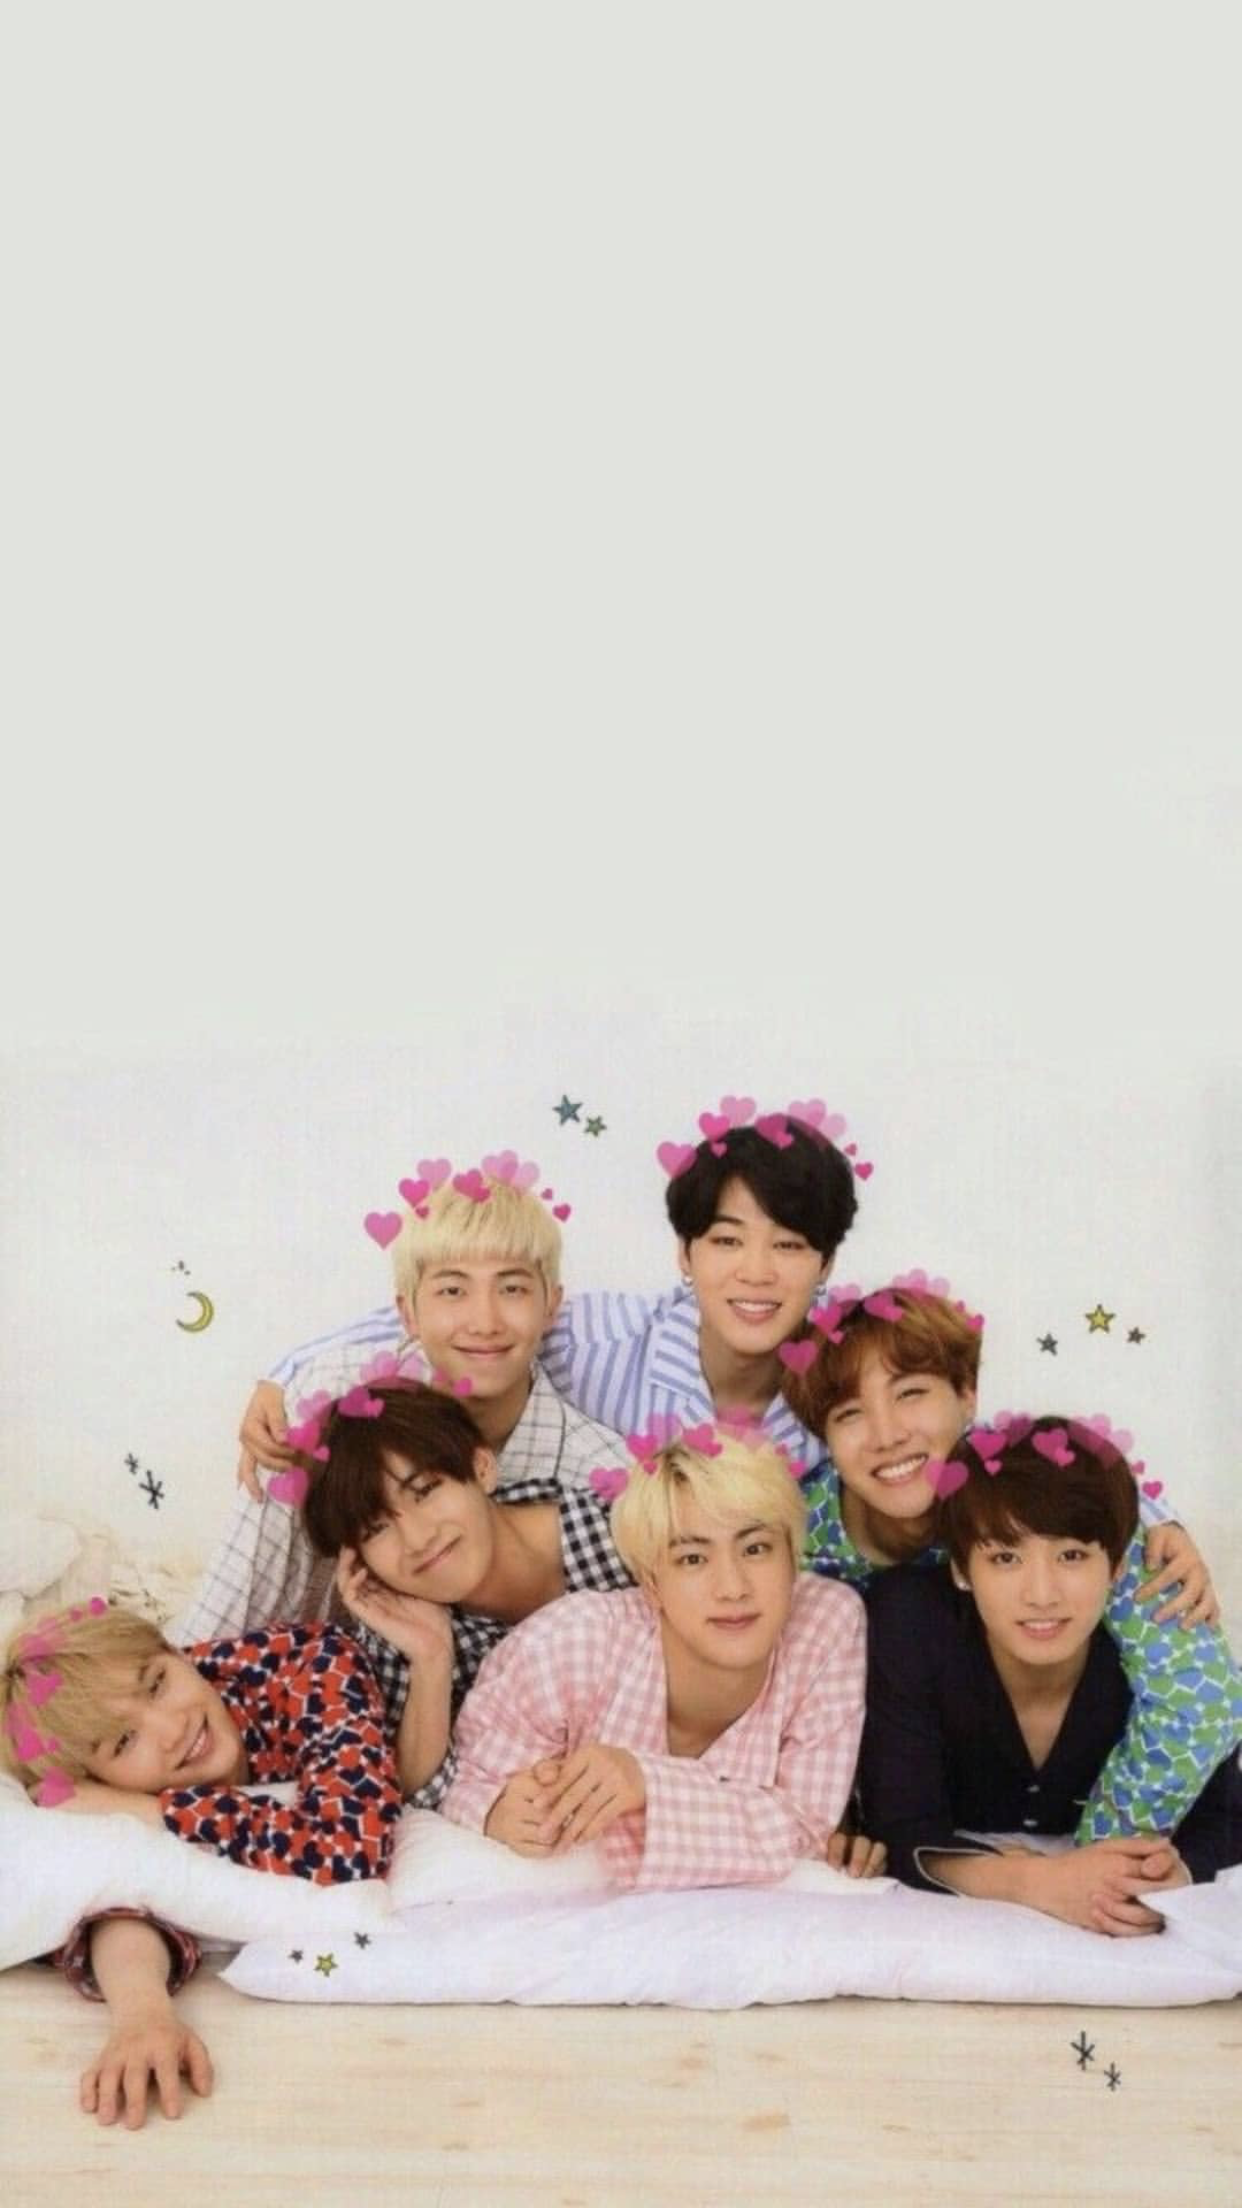 Cute BTS Group Wallpaper Free Cute BTS Group Background